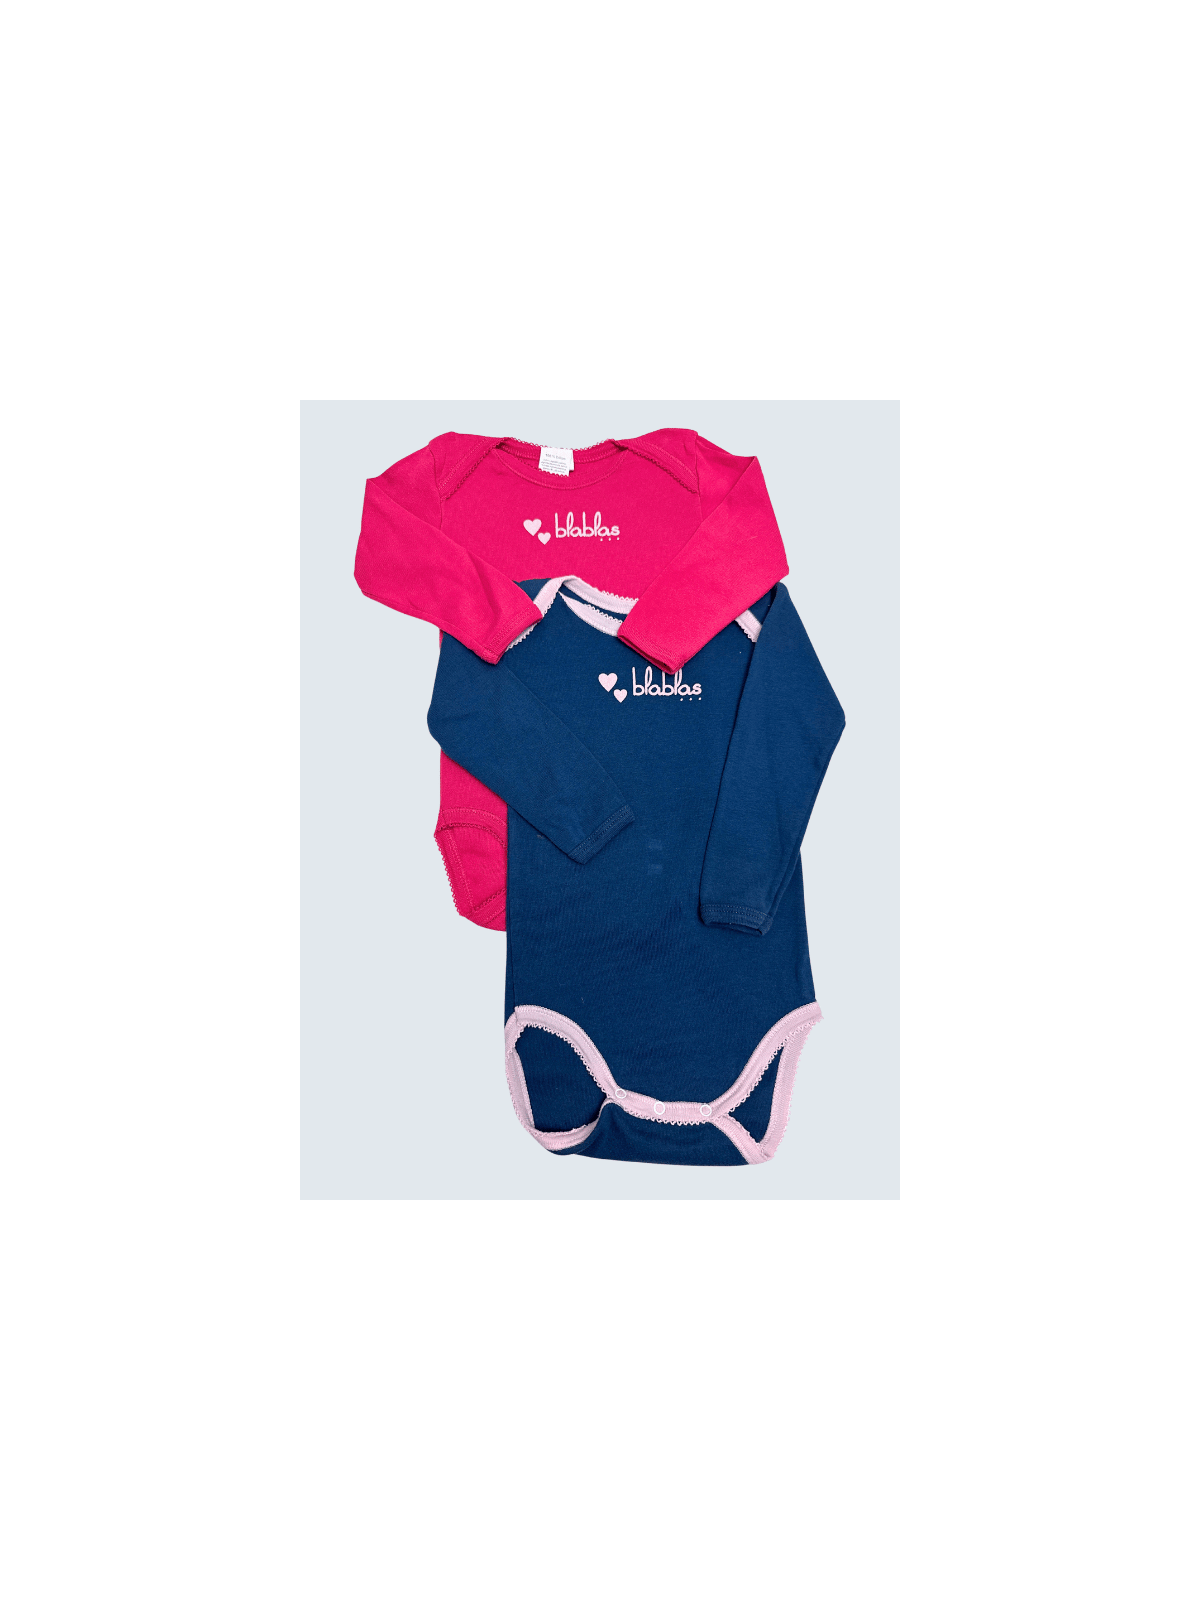 Body d'occasion Absorba 18 Mois pour fille.